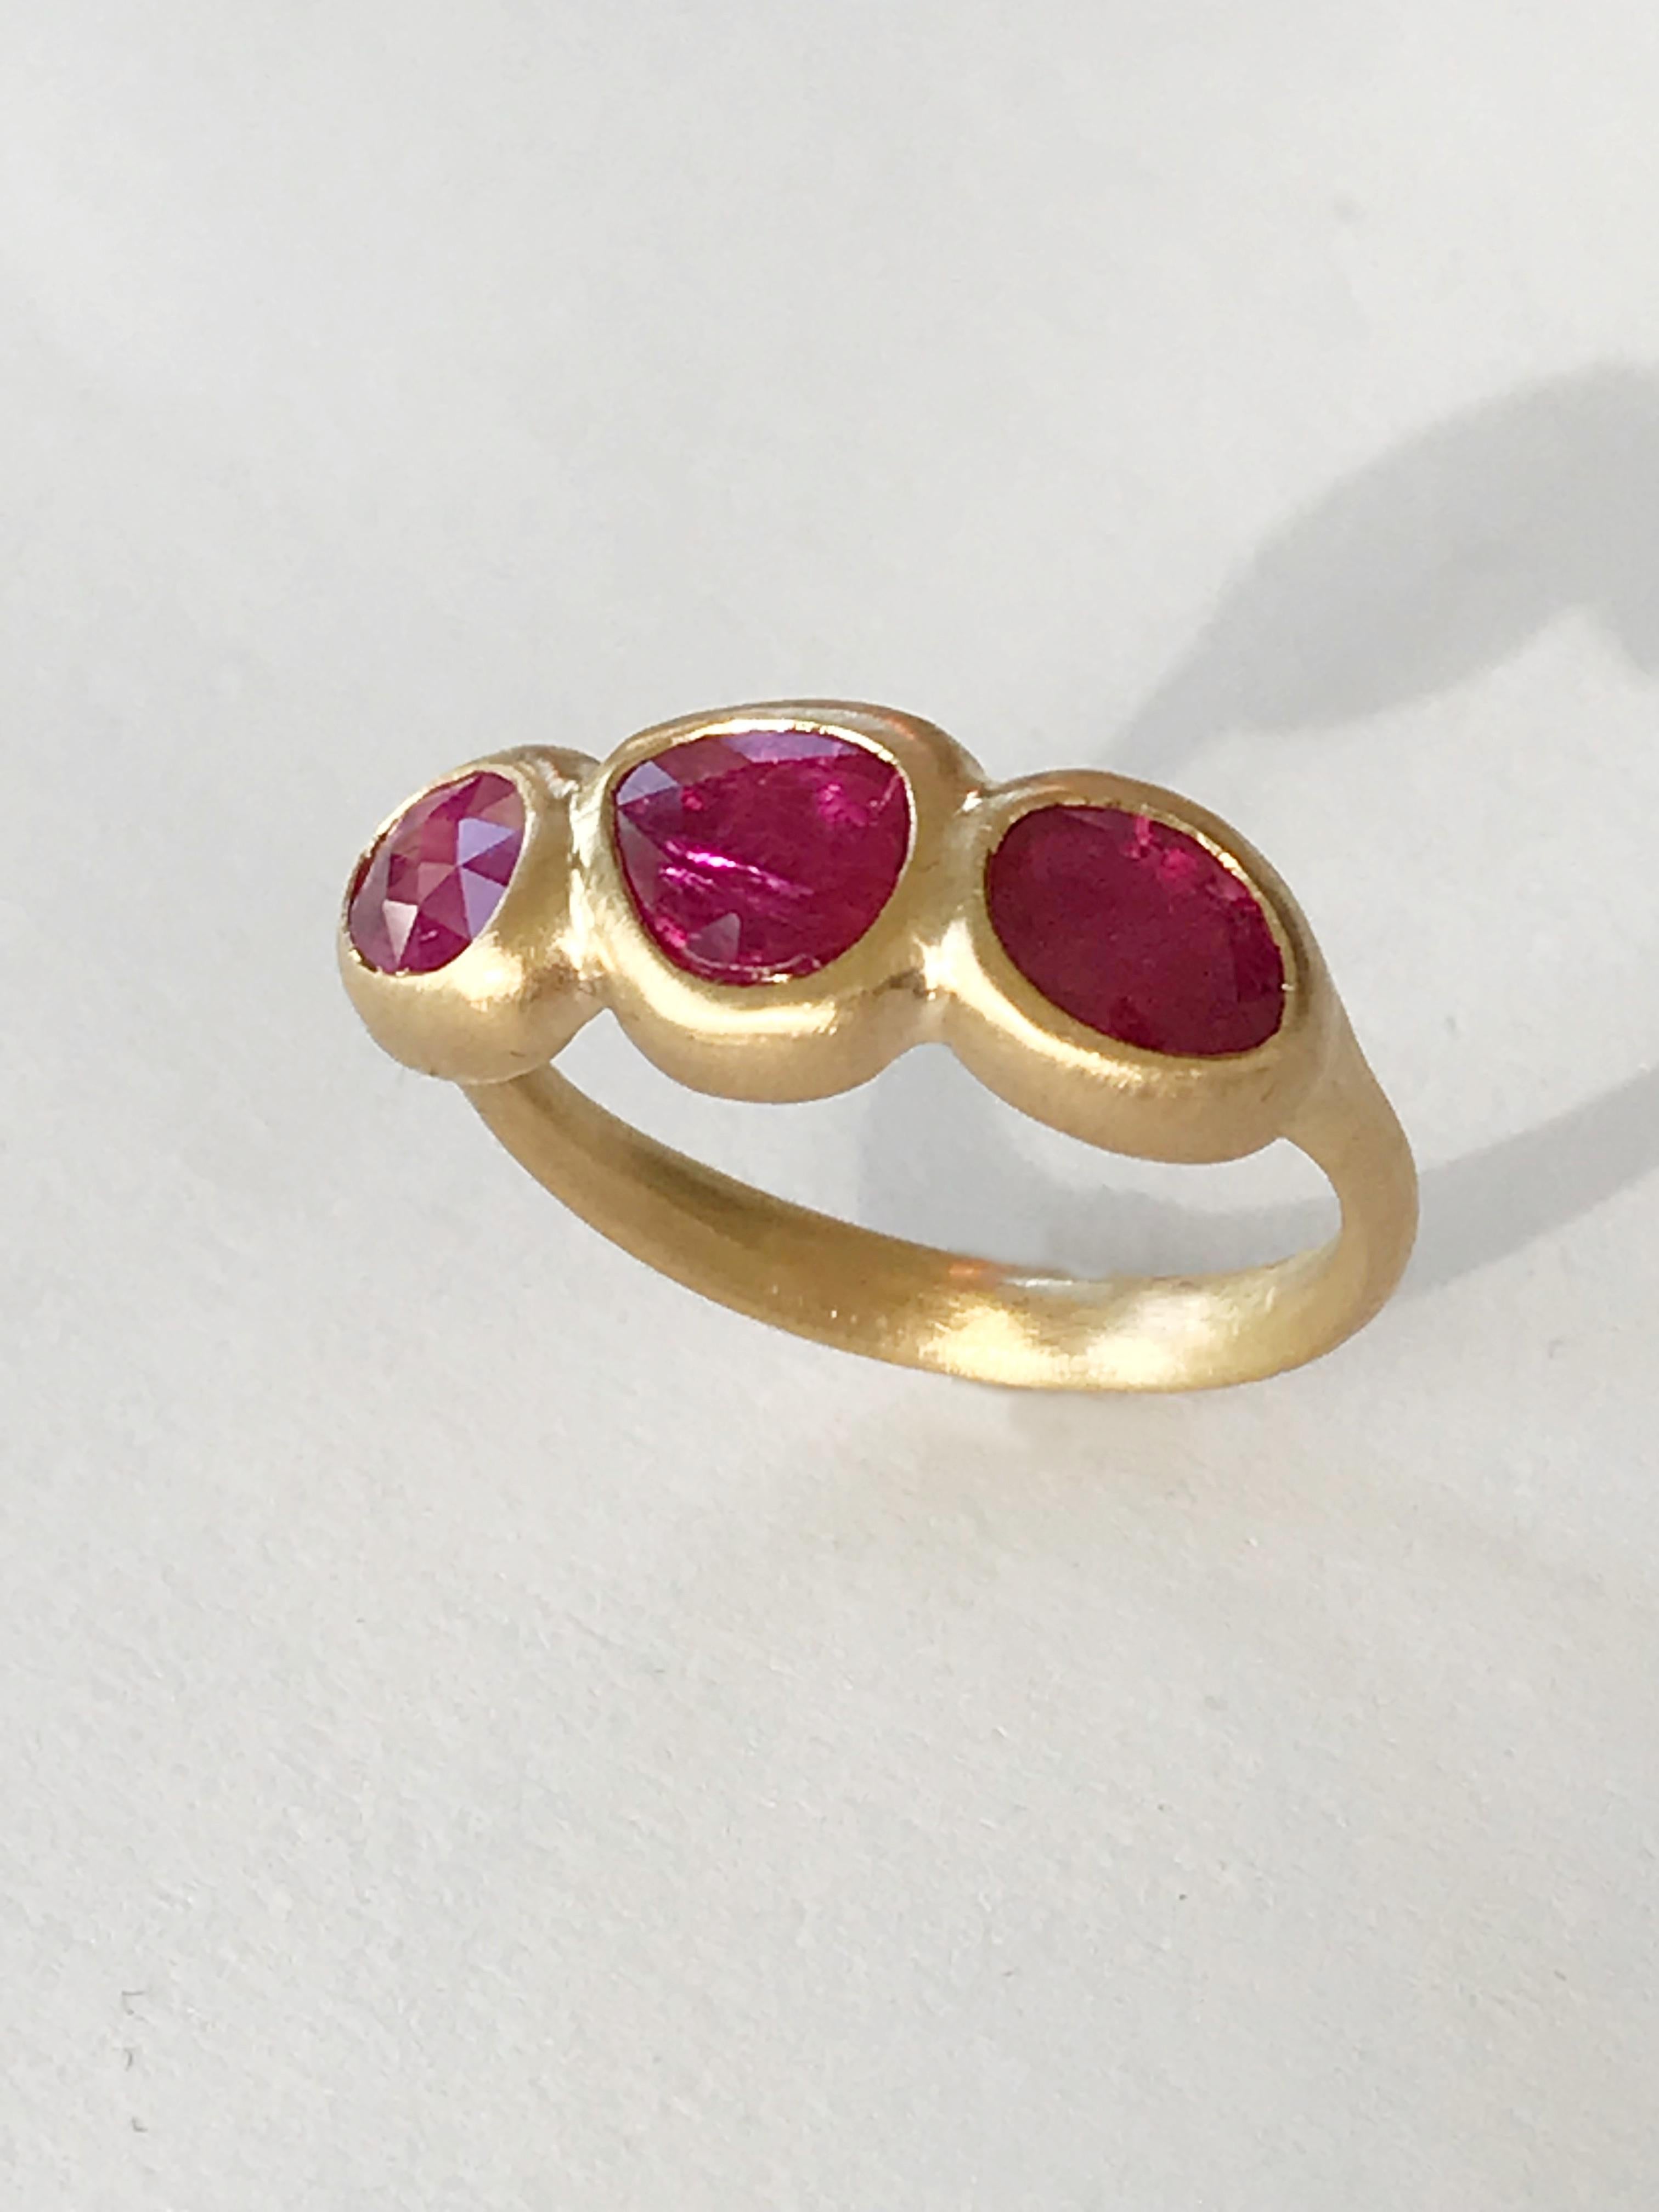 Dalben design One of a Kind 18k yellow gold matte finishing ring with 3 bezel-set rose cut slice ruby total weight 1,4 carat . 
Ring size 7 USA - EU 54 re-sizable to most finger sizes. 
Bezel stone dimensions :
height 8,5 mm
total width 21 mm
The